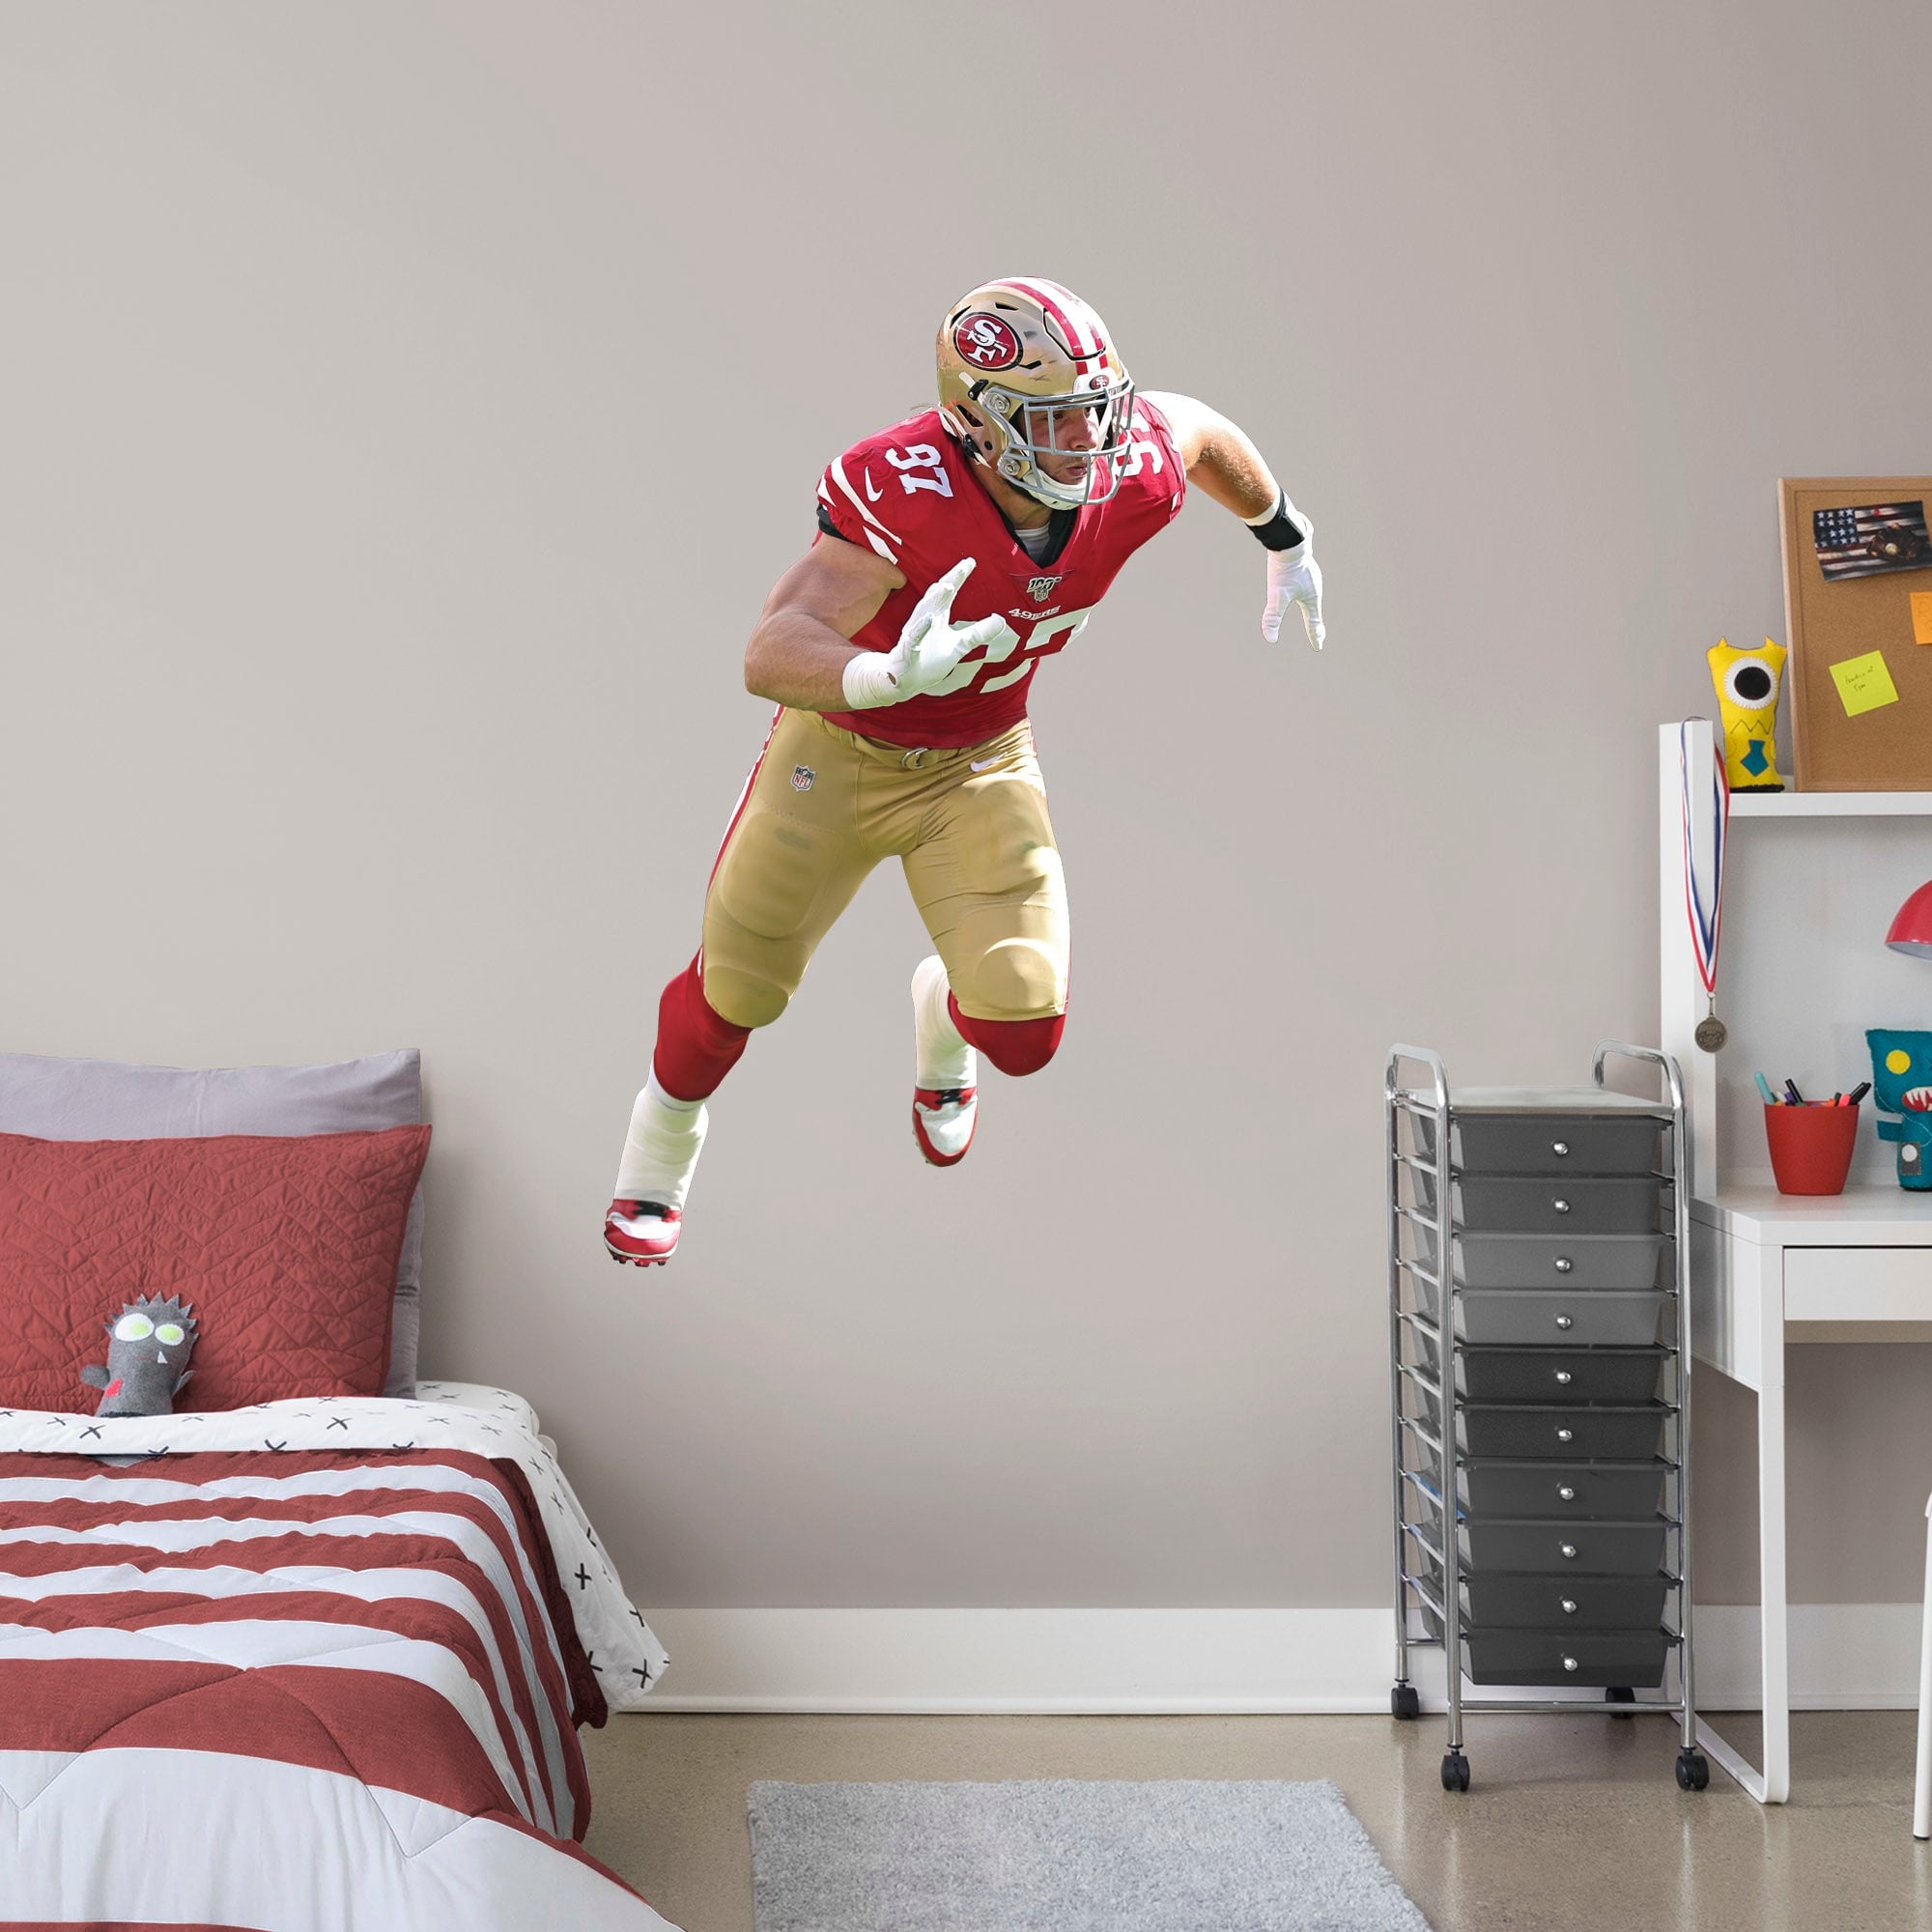 Nick Bosa for San Francisco 49ers - Officially Licensed NFL Removable Wall Decal Giant Athlete + 2 Decals (35"W x 48"H) by Fathe